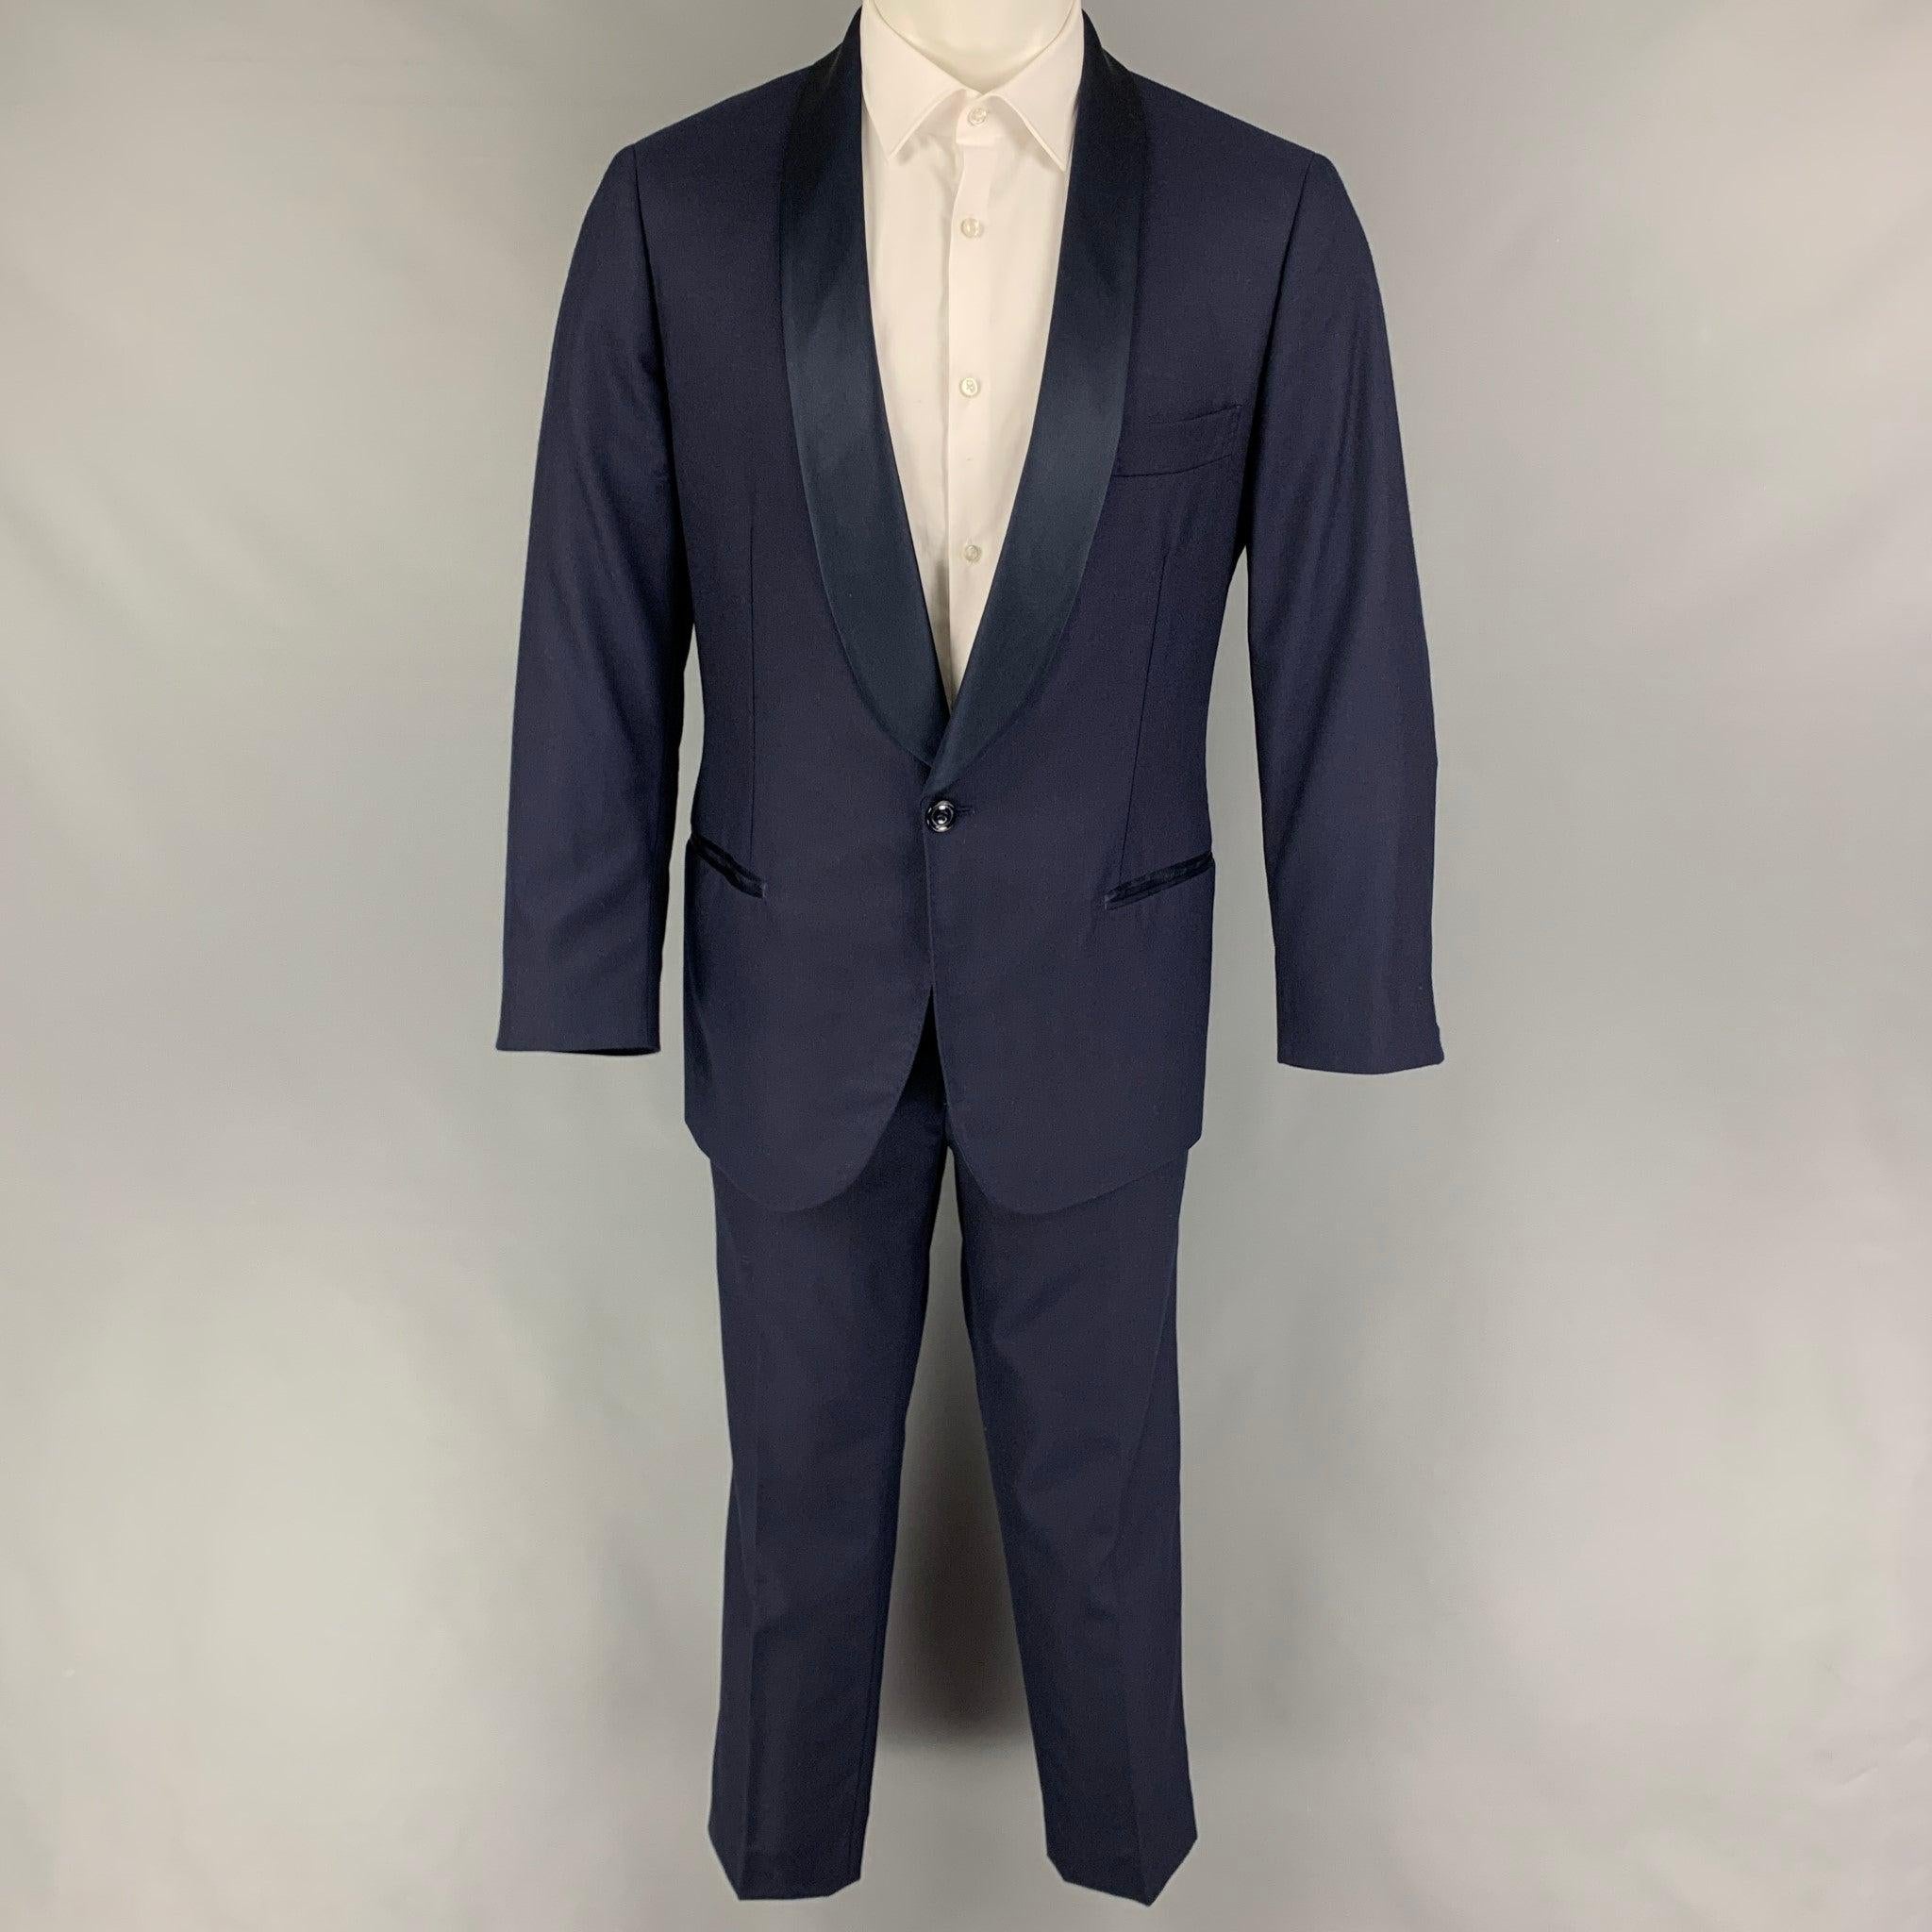 BRUNELLO CUCINELLI
suit comes in a navy cotton / silk with a full liner and includes a single breasted, single button sport coat with a shawl collar and matching front flat trousers. Made in Italy.Very Good Pre-Owned Condition. Light marks at